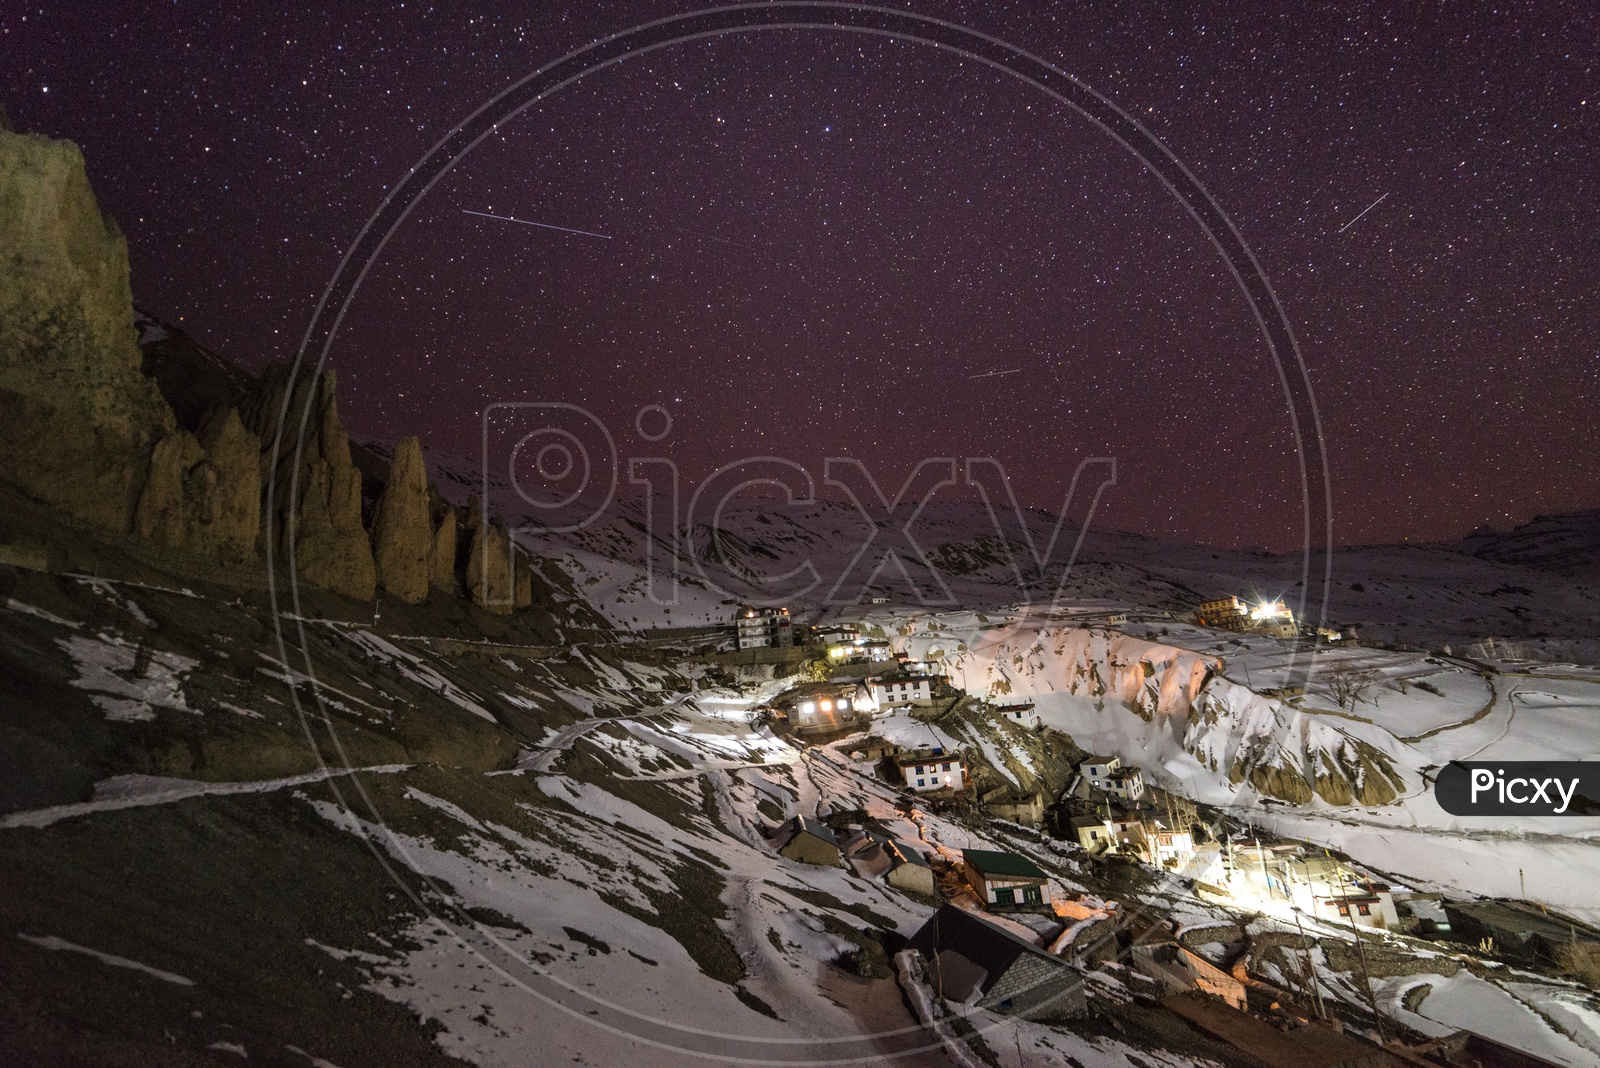 Night View of Spiti Village Covered in Snow with Stars in Sky